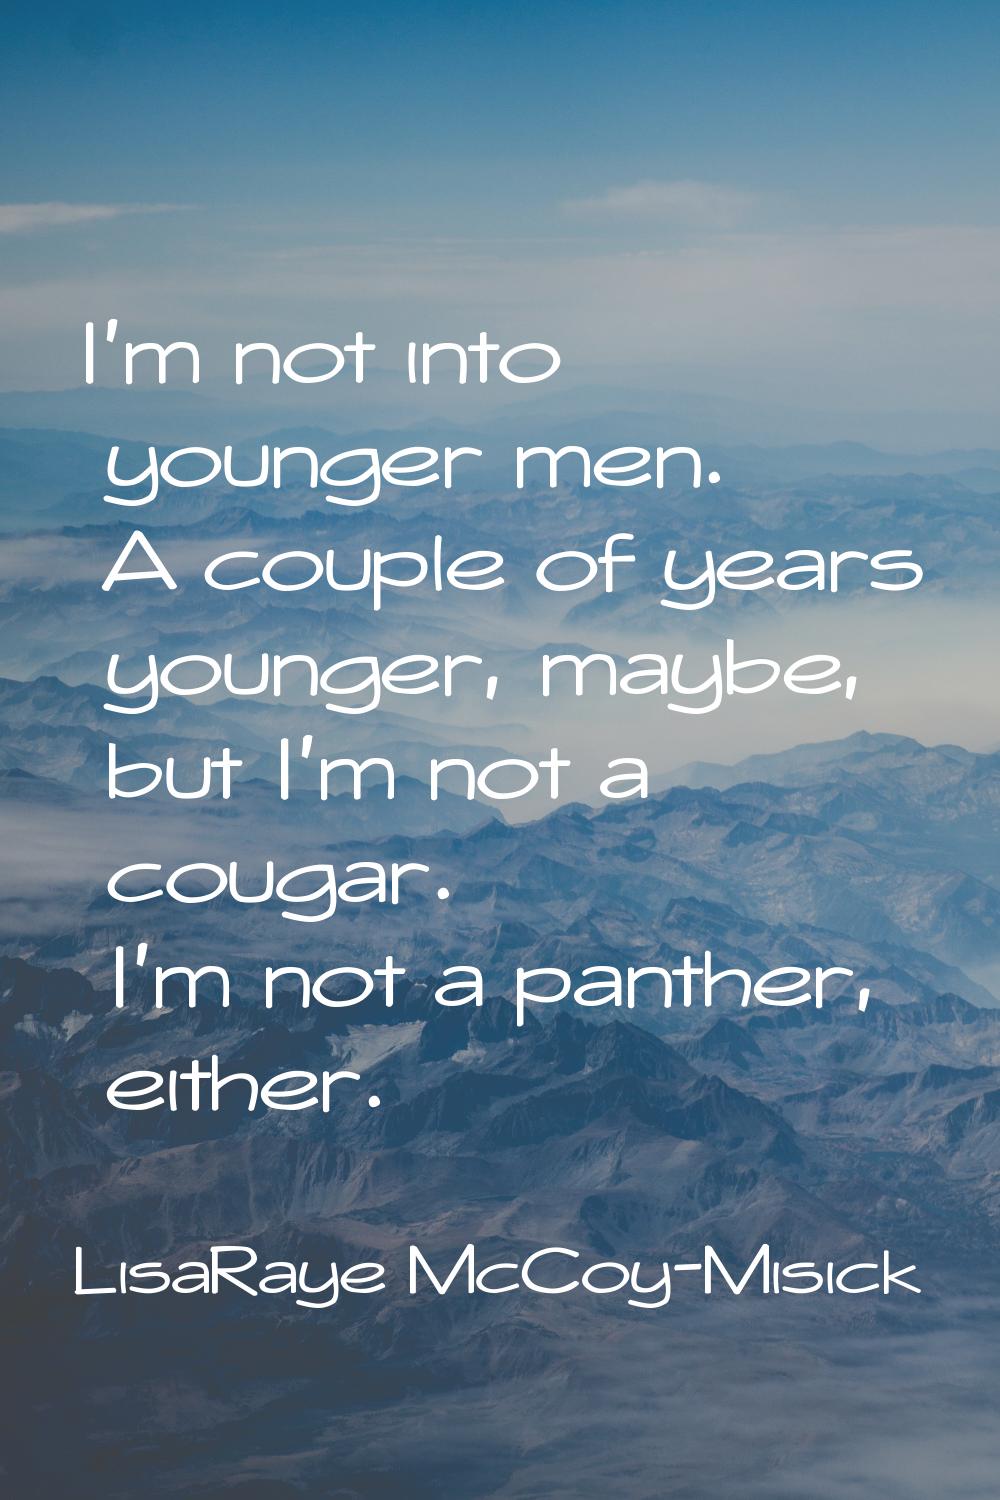 I'm not into younger men. A couple of years younger, maybe, but I'm not a cougar. I'm not a panther